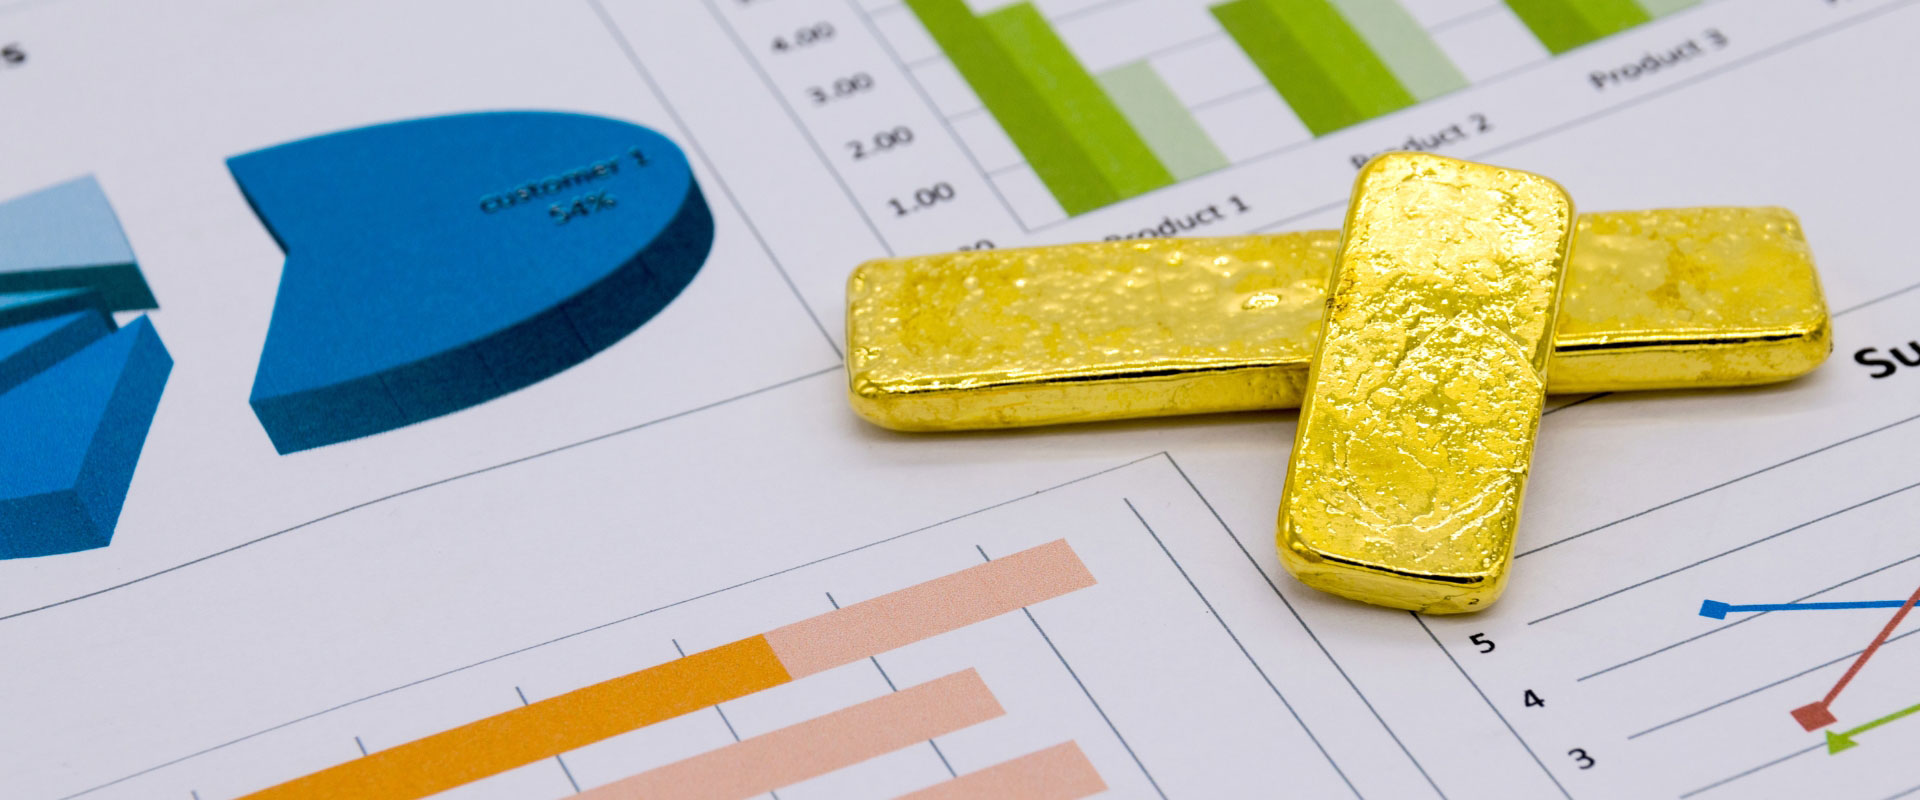 two gold bars on business report